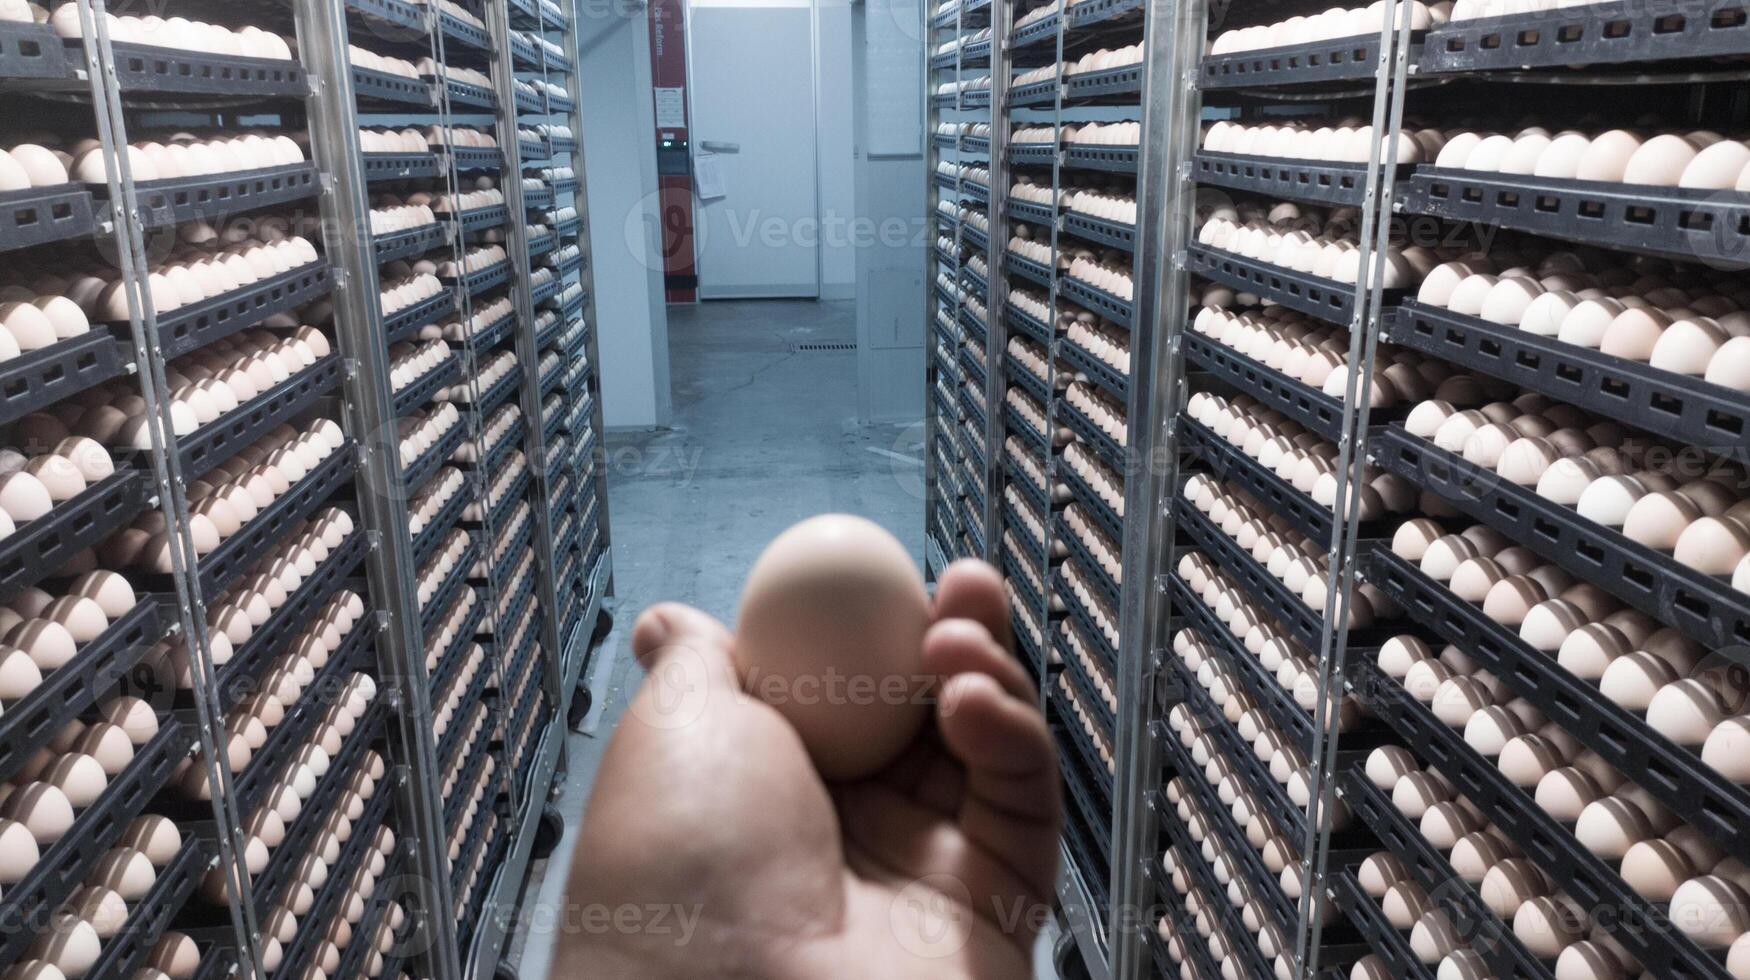 The Quality control doing Quality check for hatching eggs  on the incubation machine room. photo